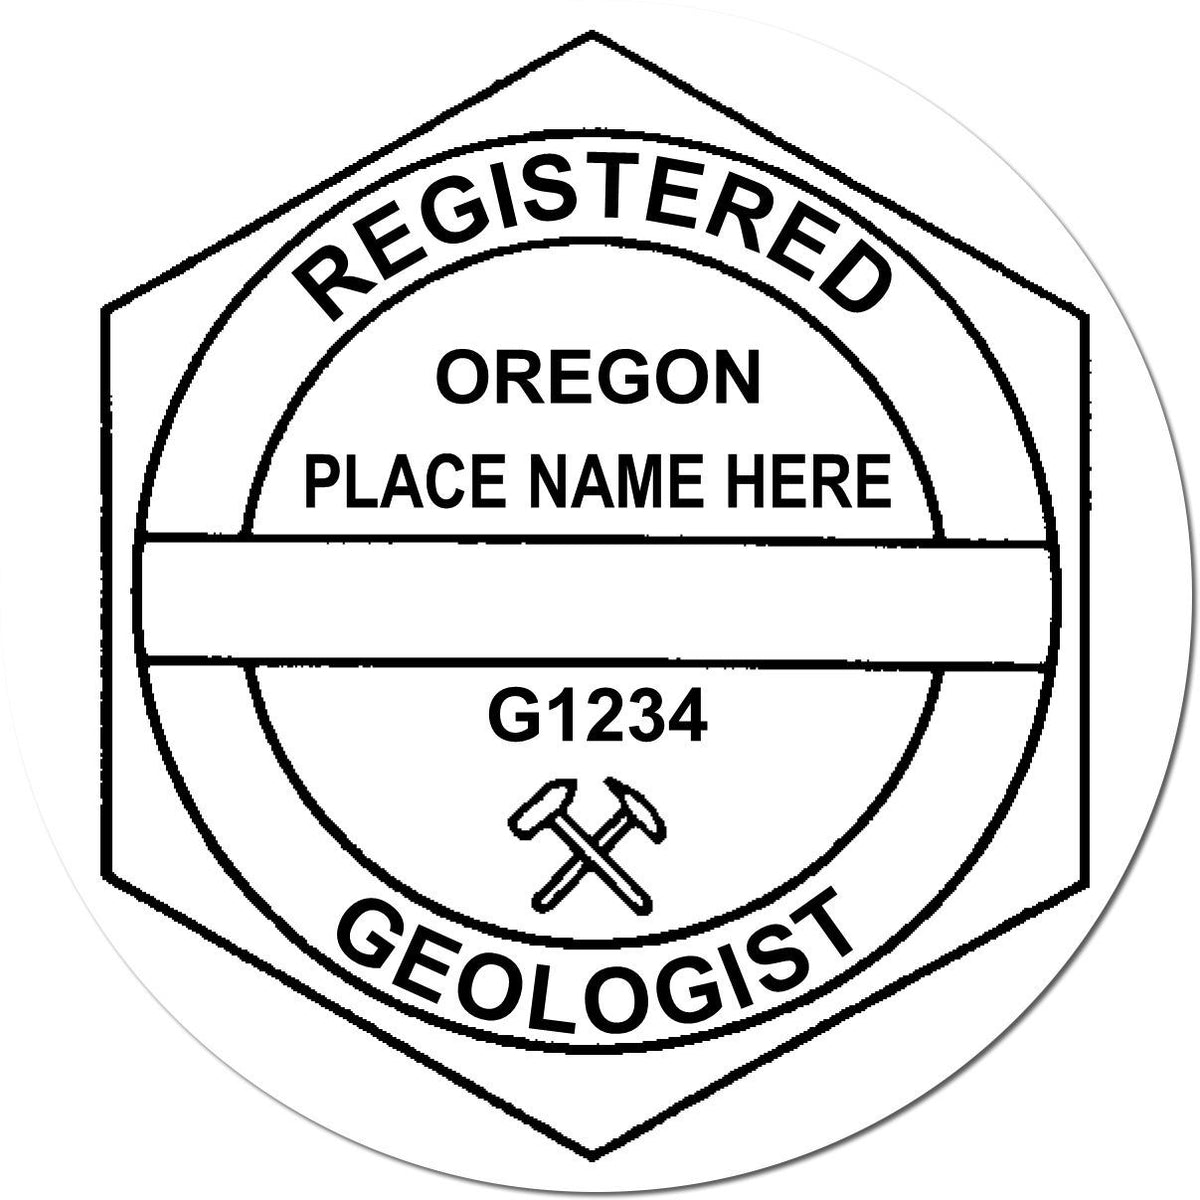 This paper is stamped with a sample imprint of the Slim Pre-Inked Oregon Professional Geologist Seal Stamp, signifying its quality and reliability.